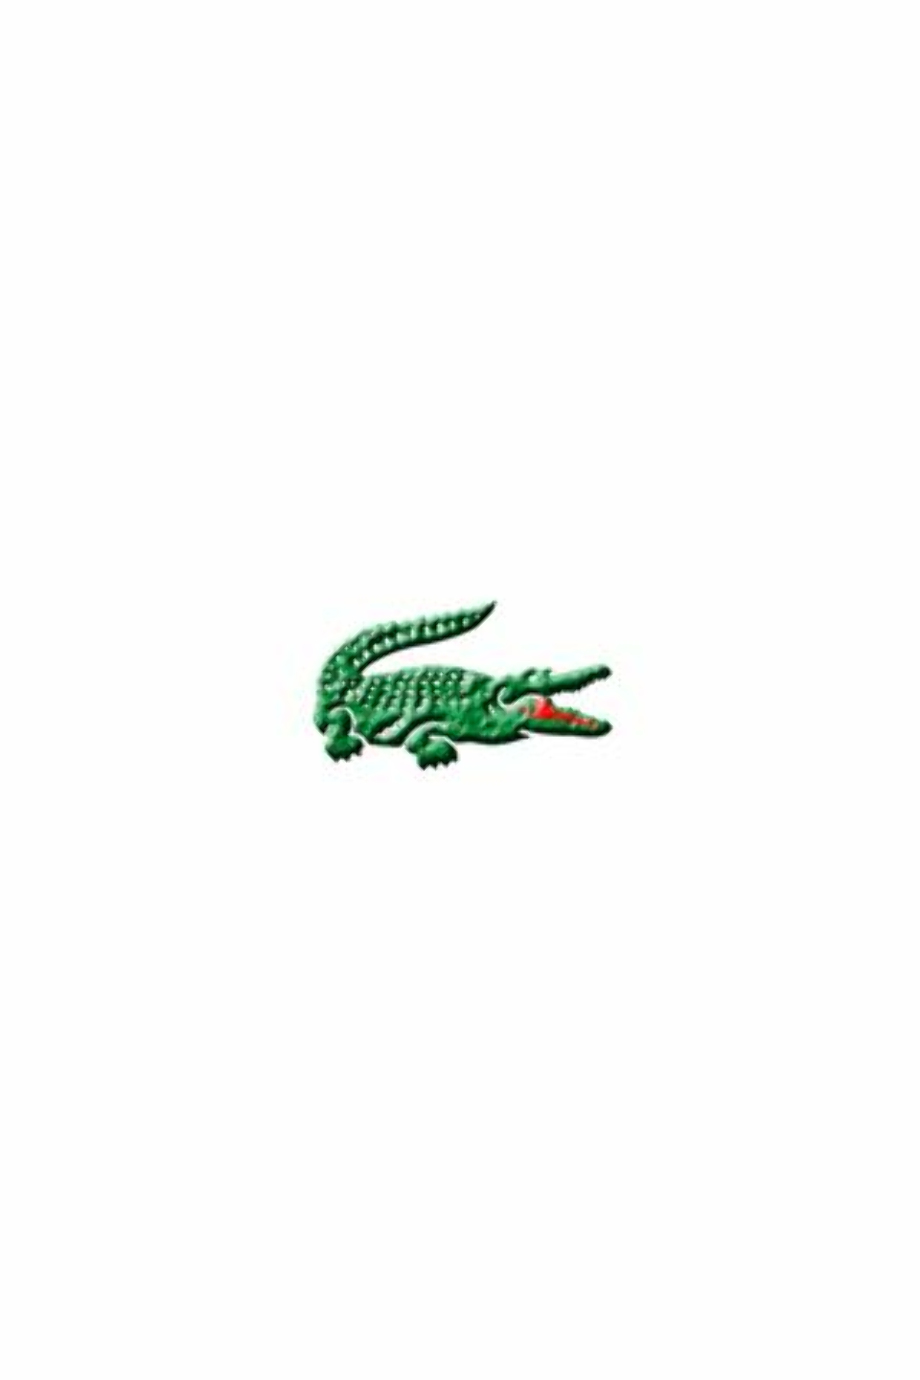 Download High Quality lacoste logo hd wallpaper Transparent PNG Images ...